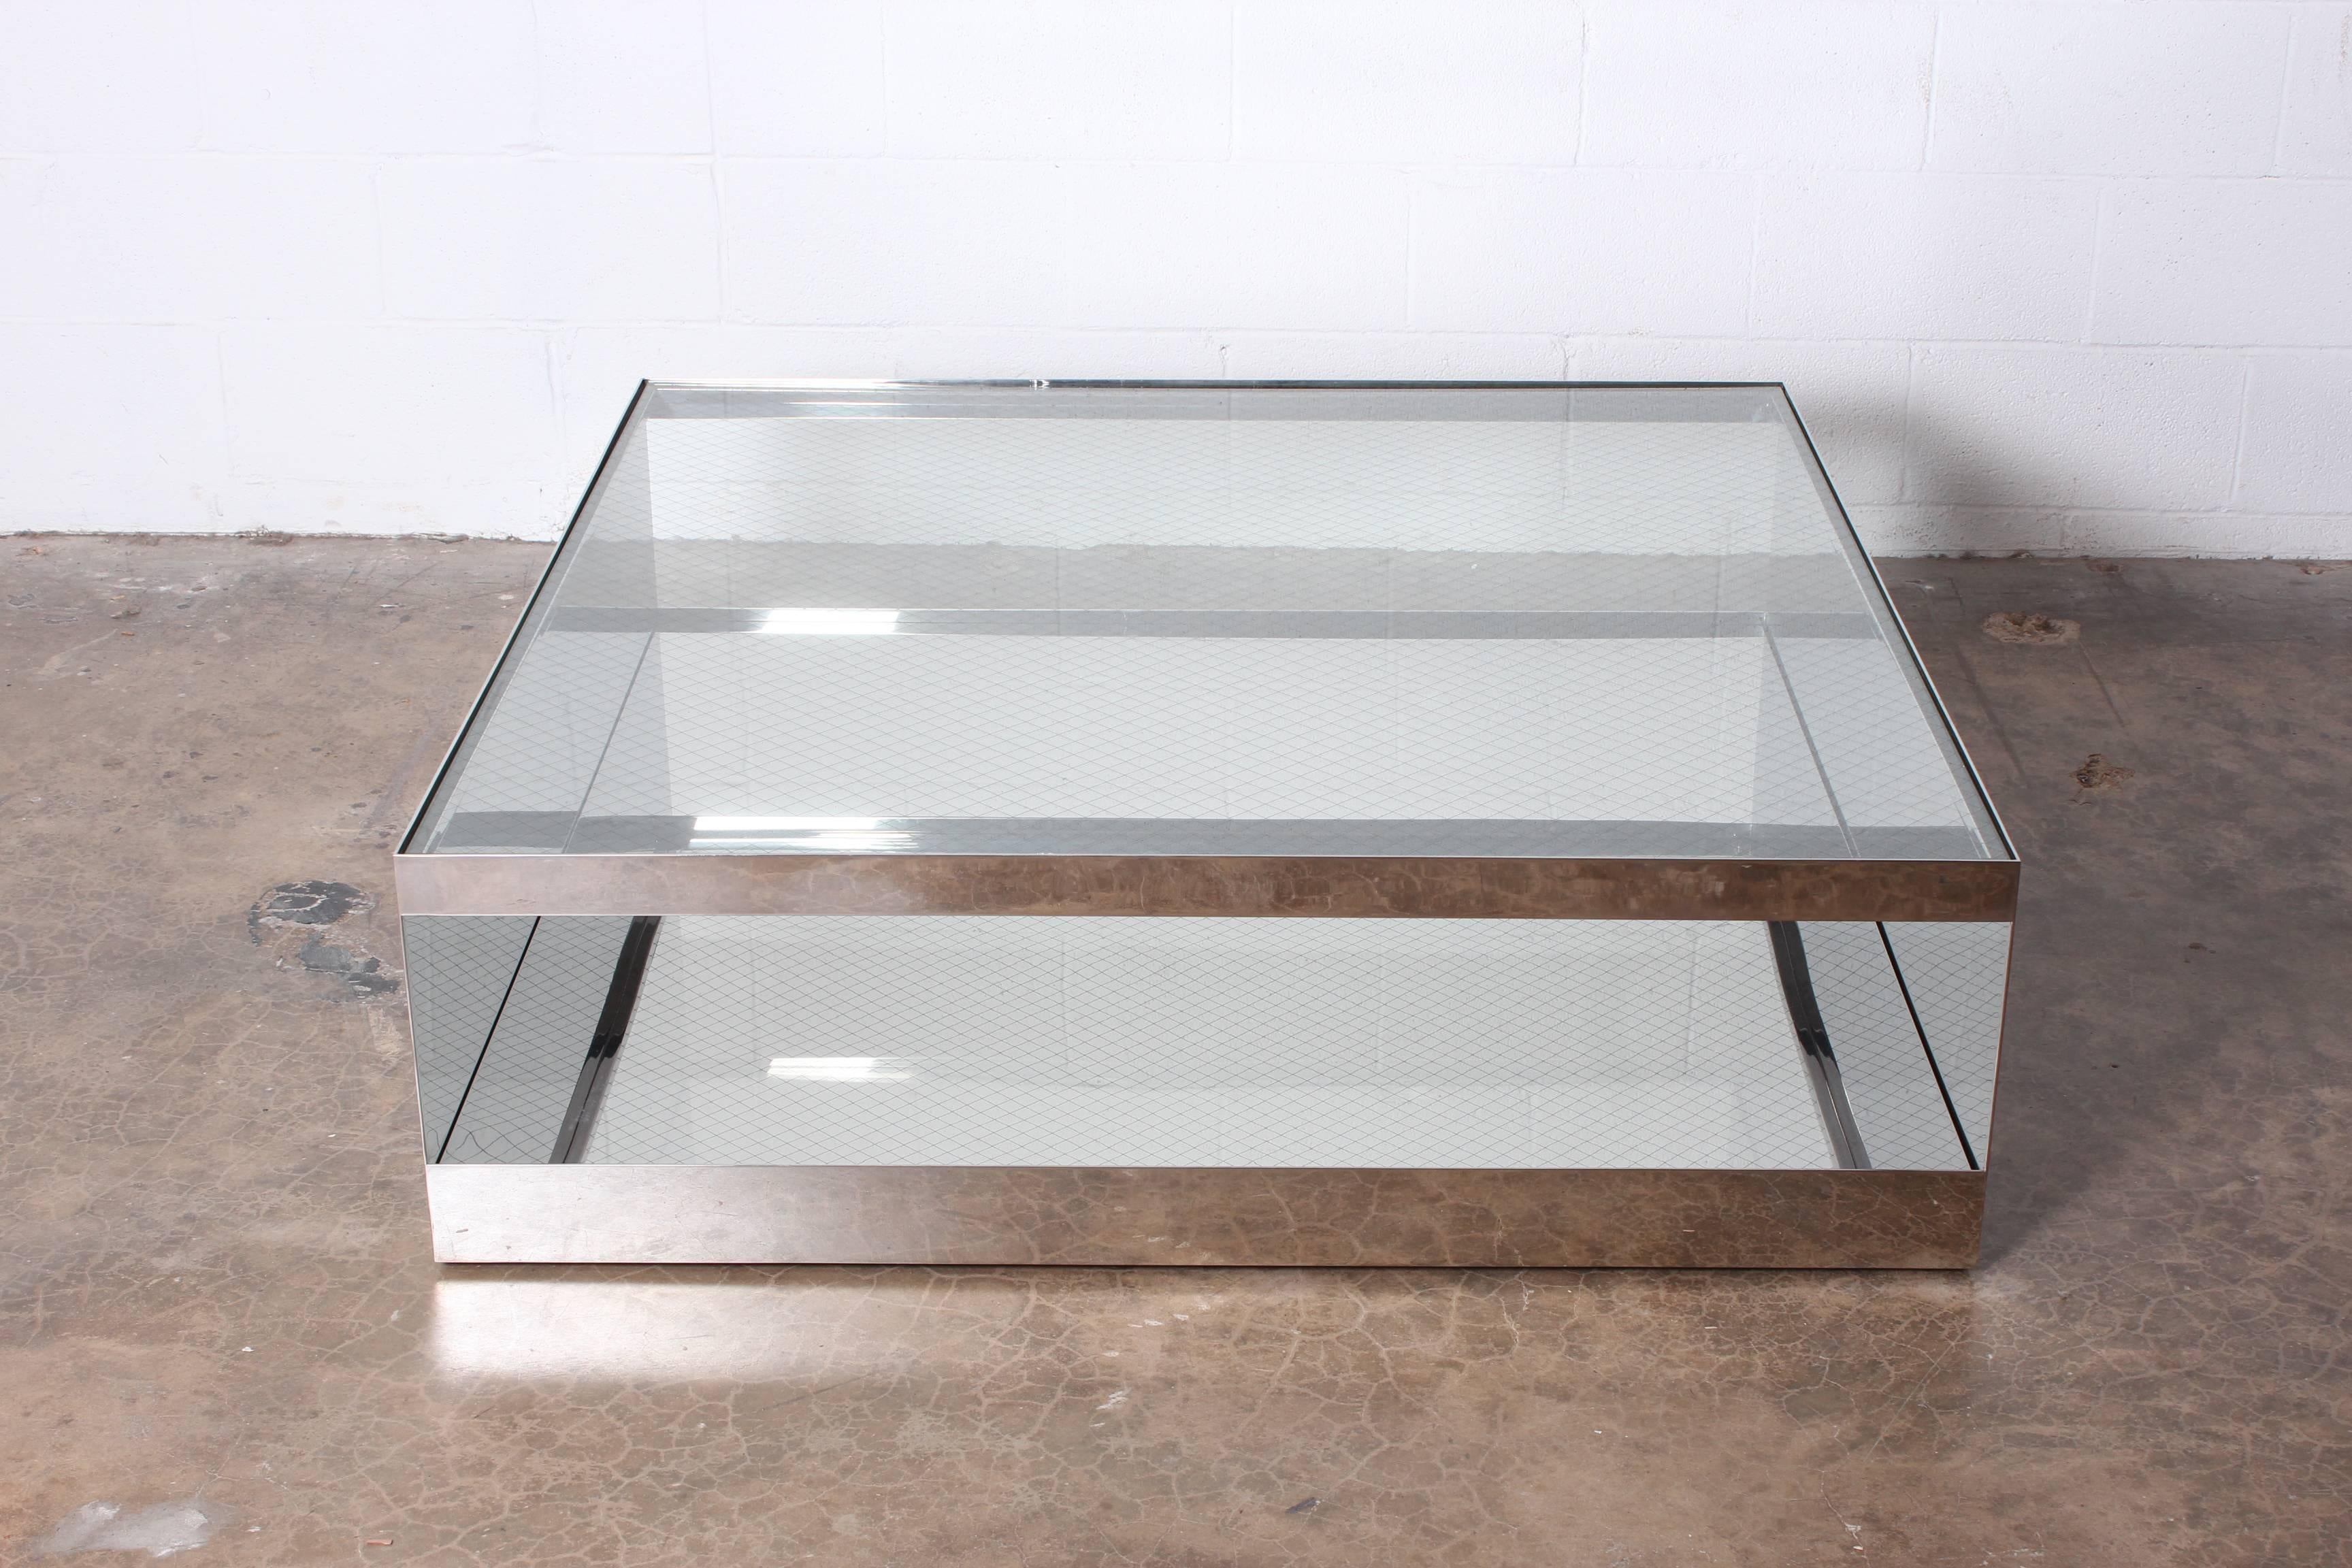 Late 20th Century Stainless Steel Coffee Table by Joe D'urso for Knoll